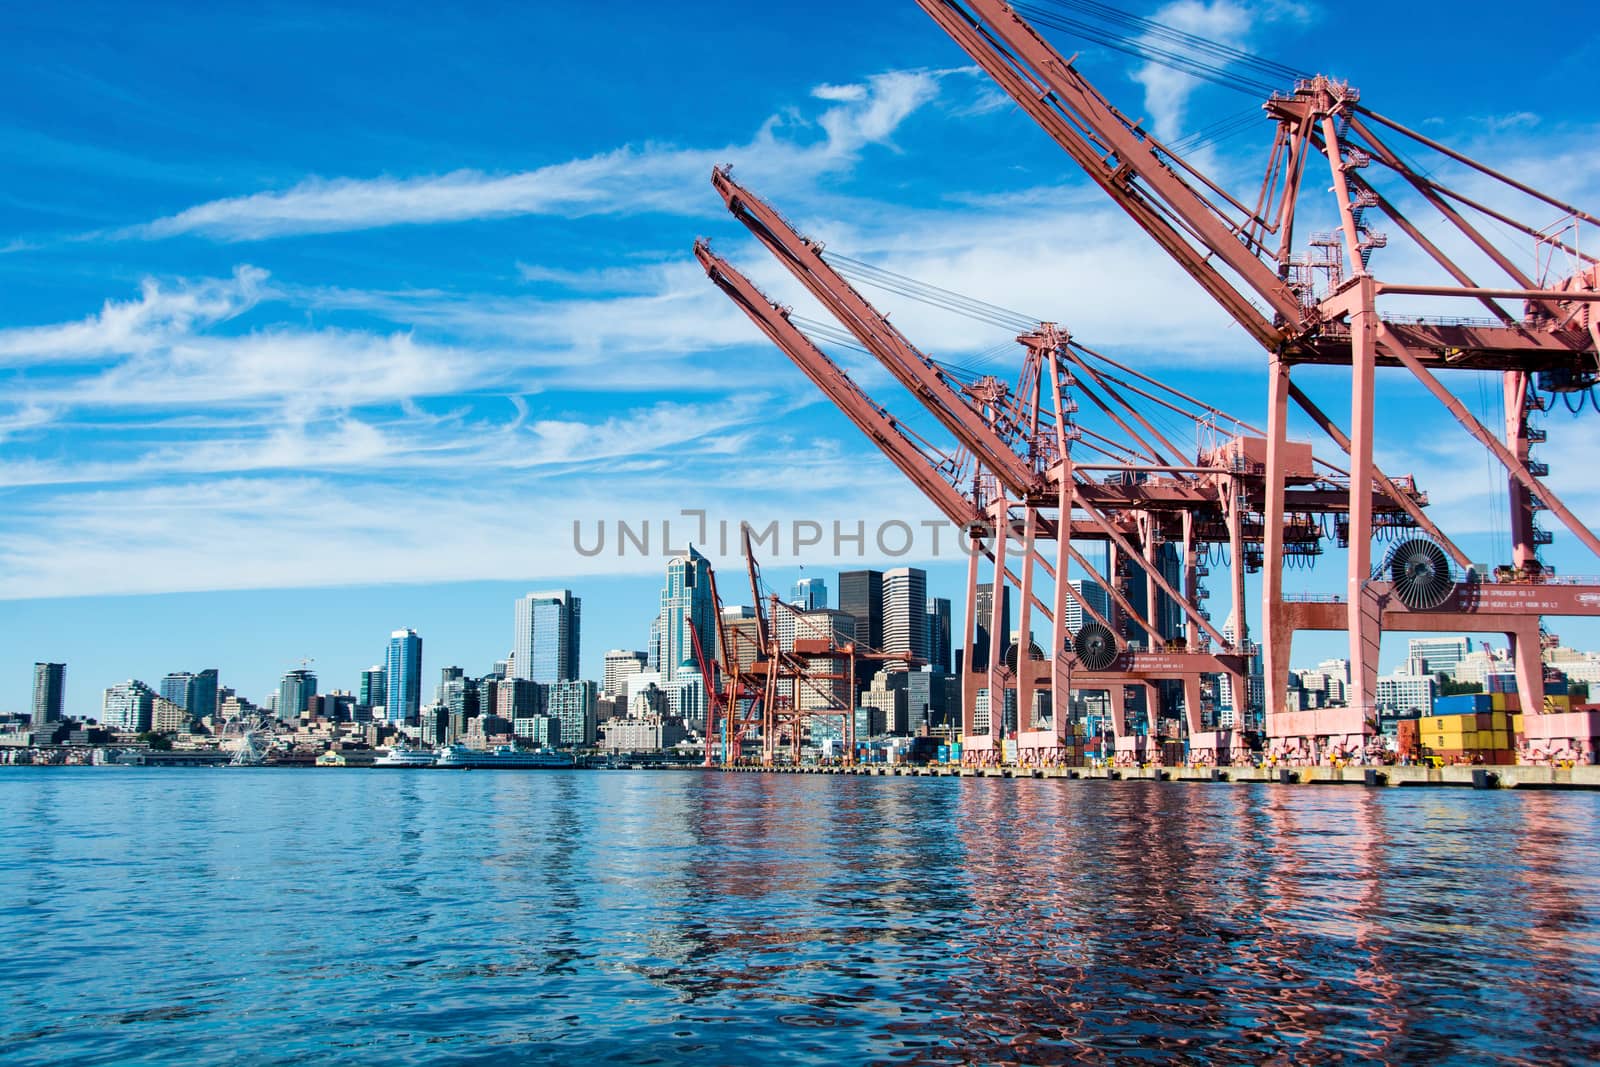 Downtown Seattle framed by container cranes.